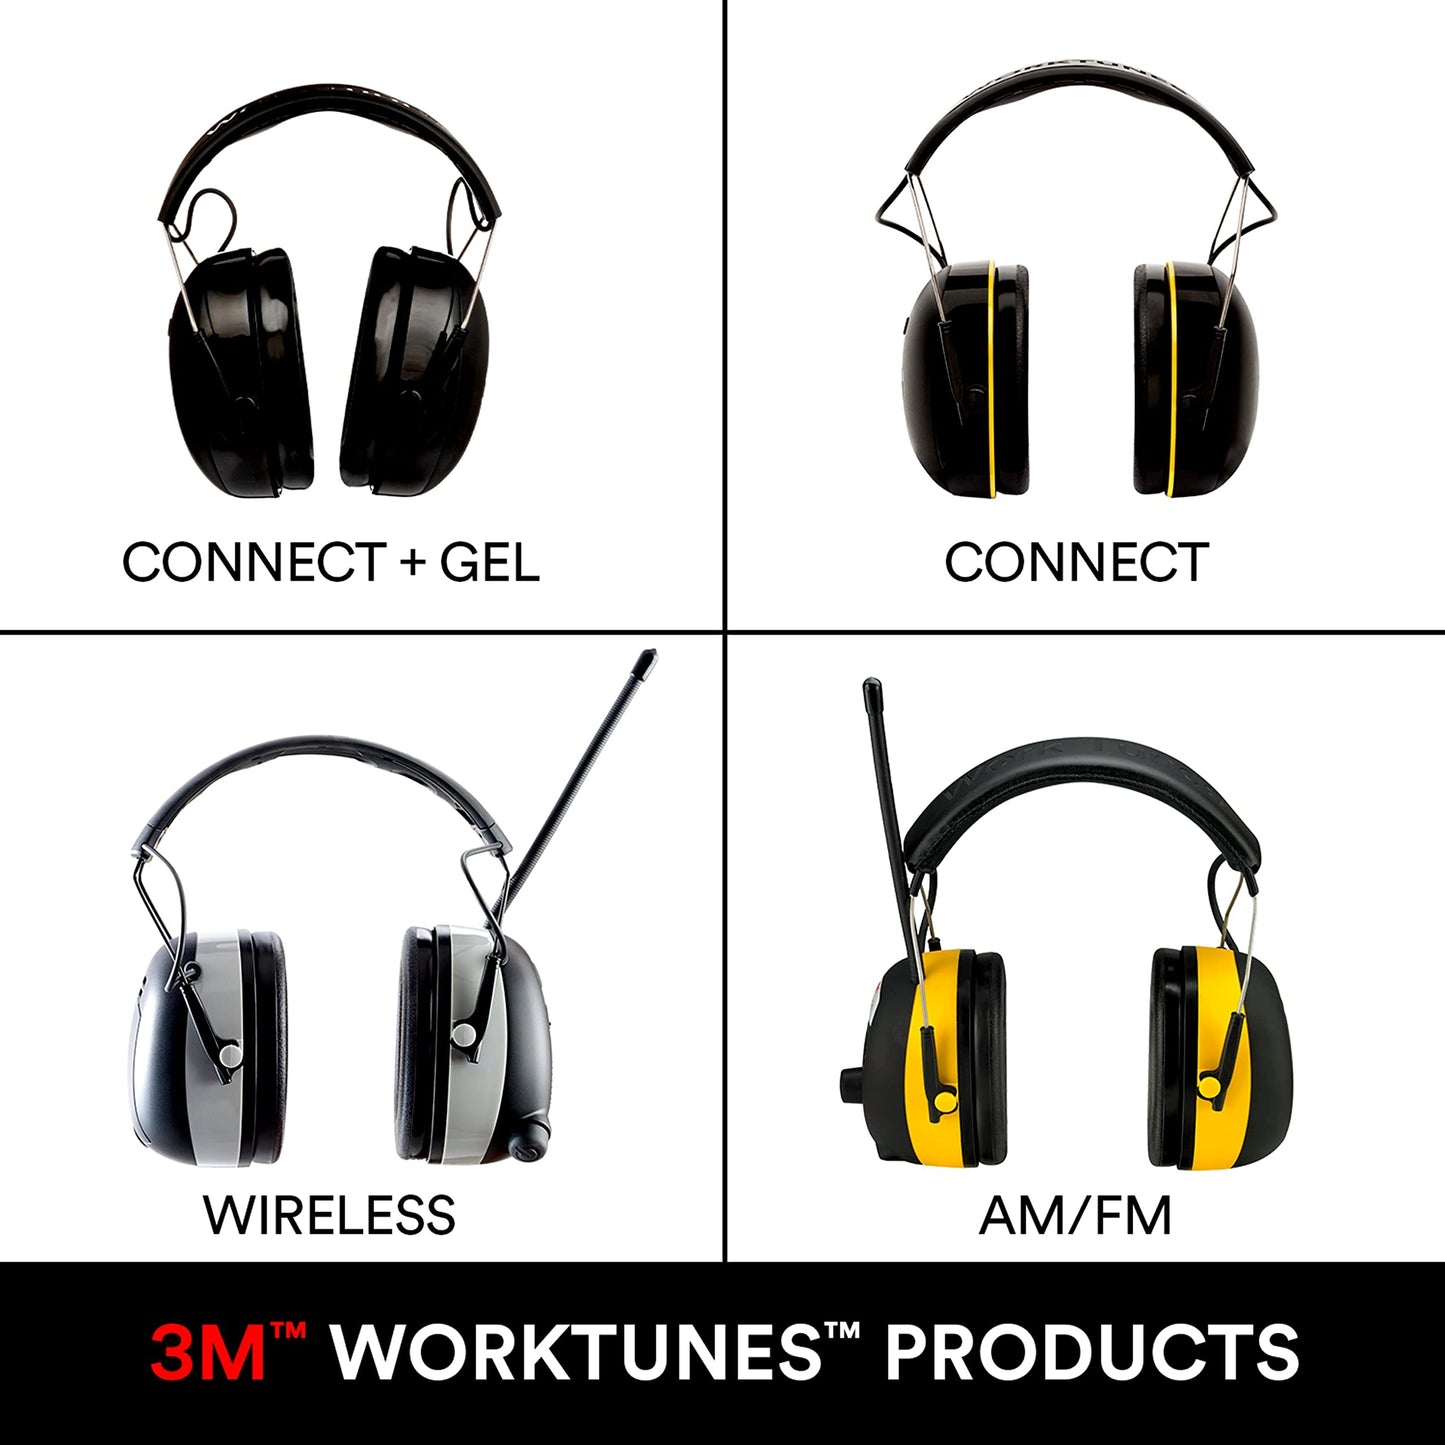 3M WorkTunes Connect + Gel Ear Cushions Hearing Protector with Bluetooth Wireless Technology, NRR 23 dB, Hearing protection for Mowing, Snowblowing,